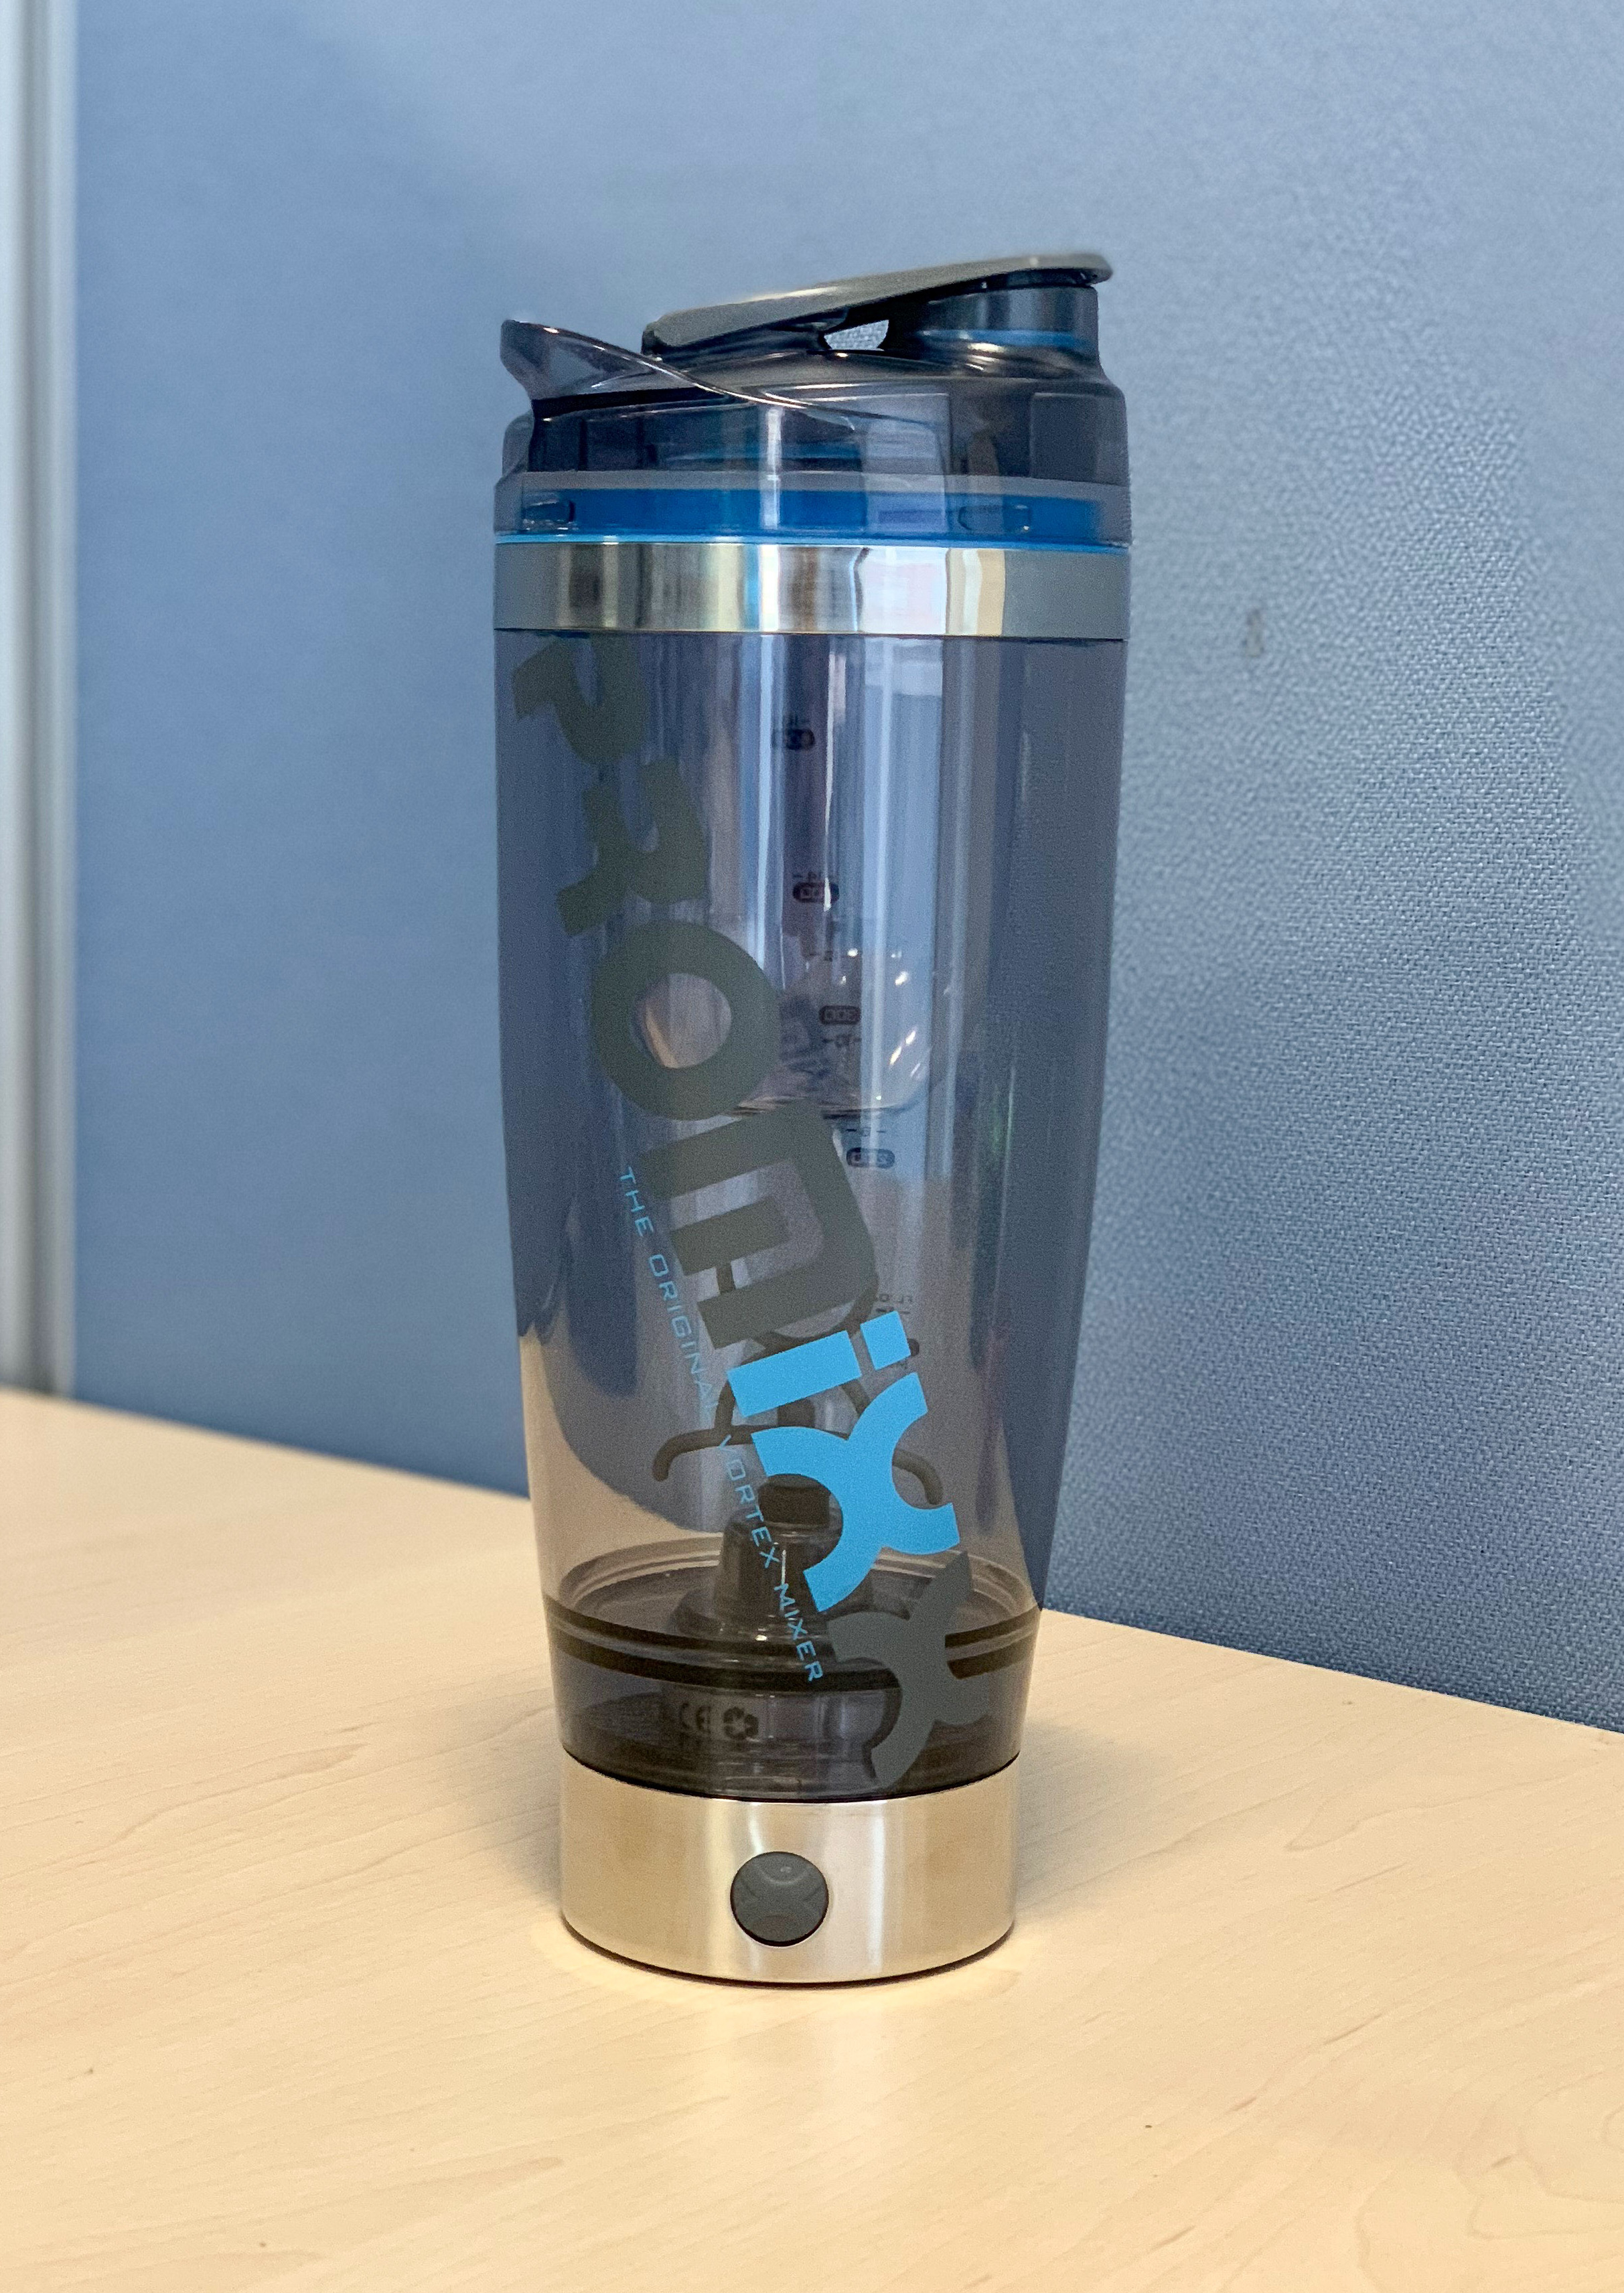 PROMiXX 2.0  The World's Most Advanced Protein Shaker Bottle